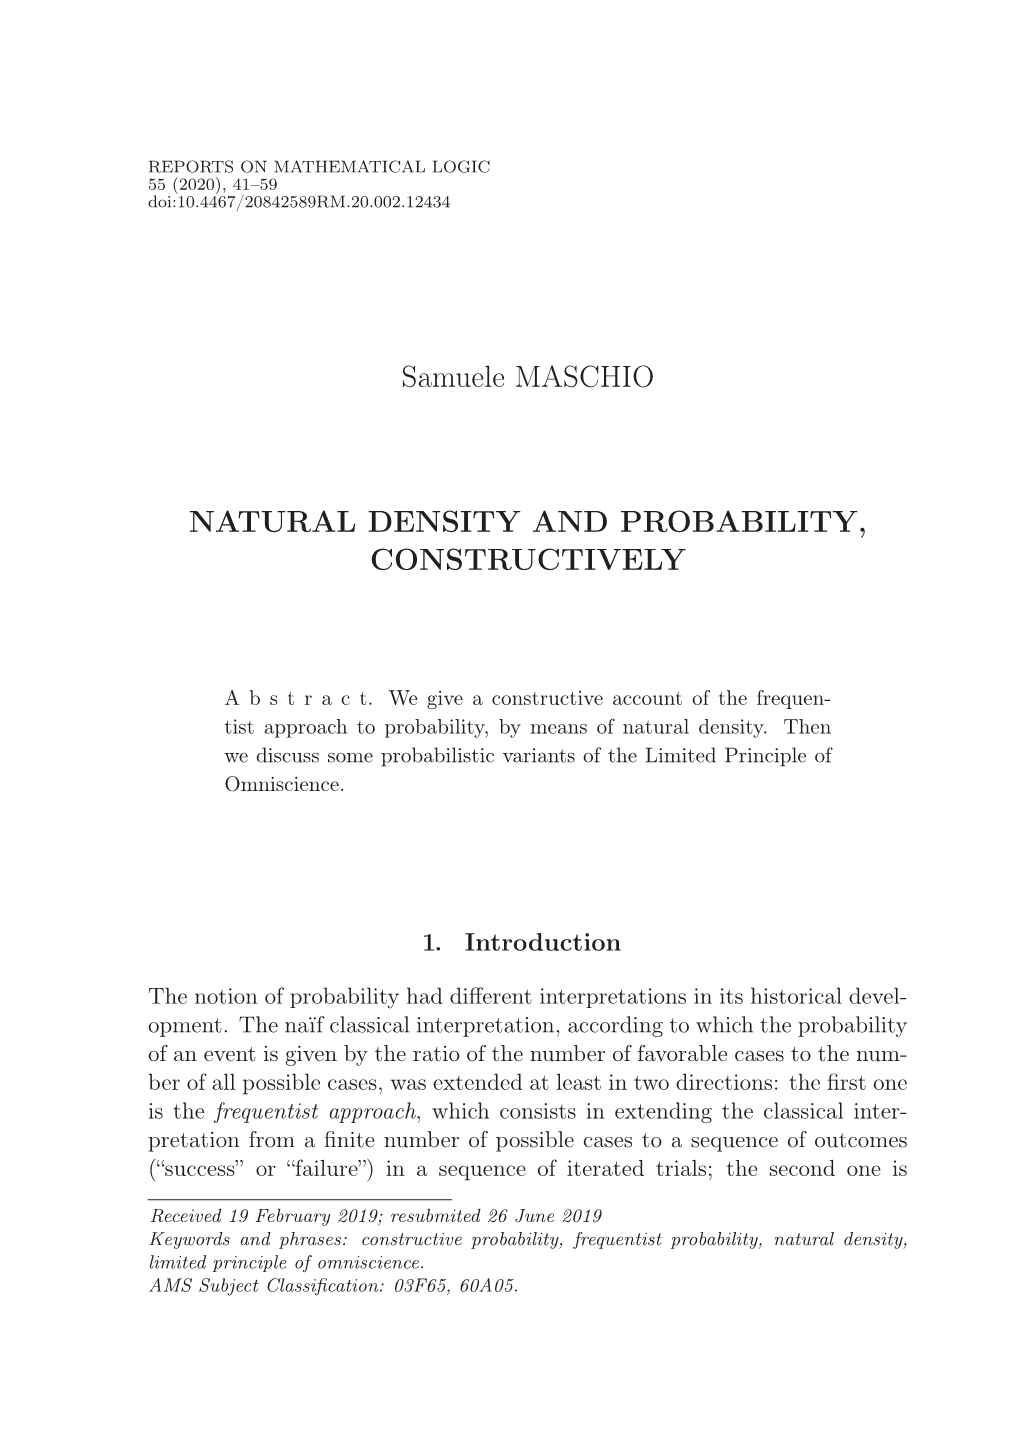 Natural Density and Probability, Constructively